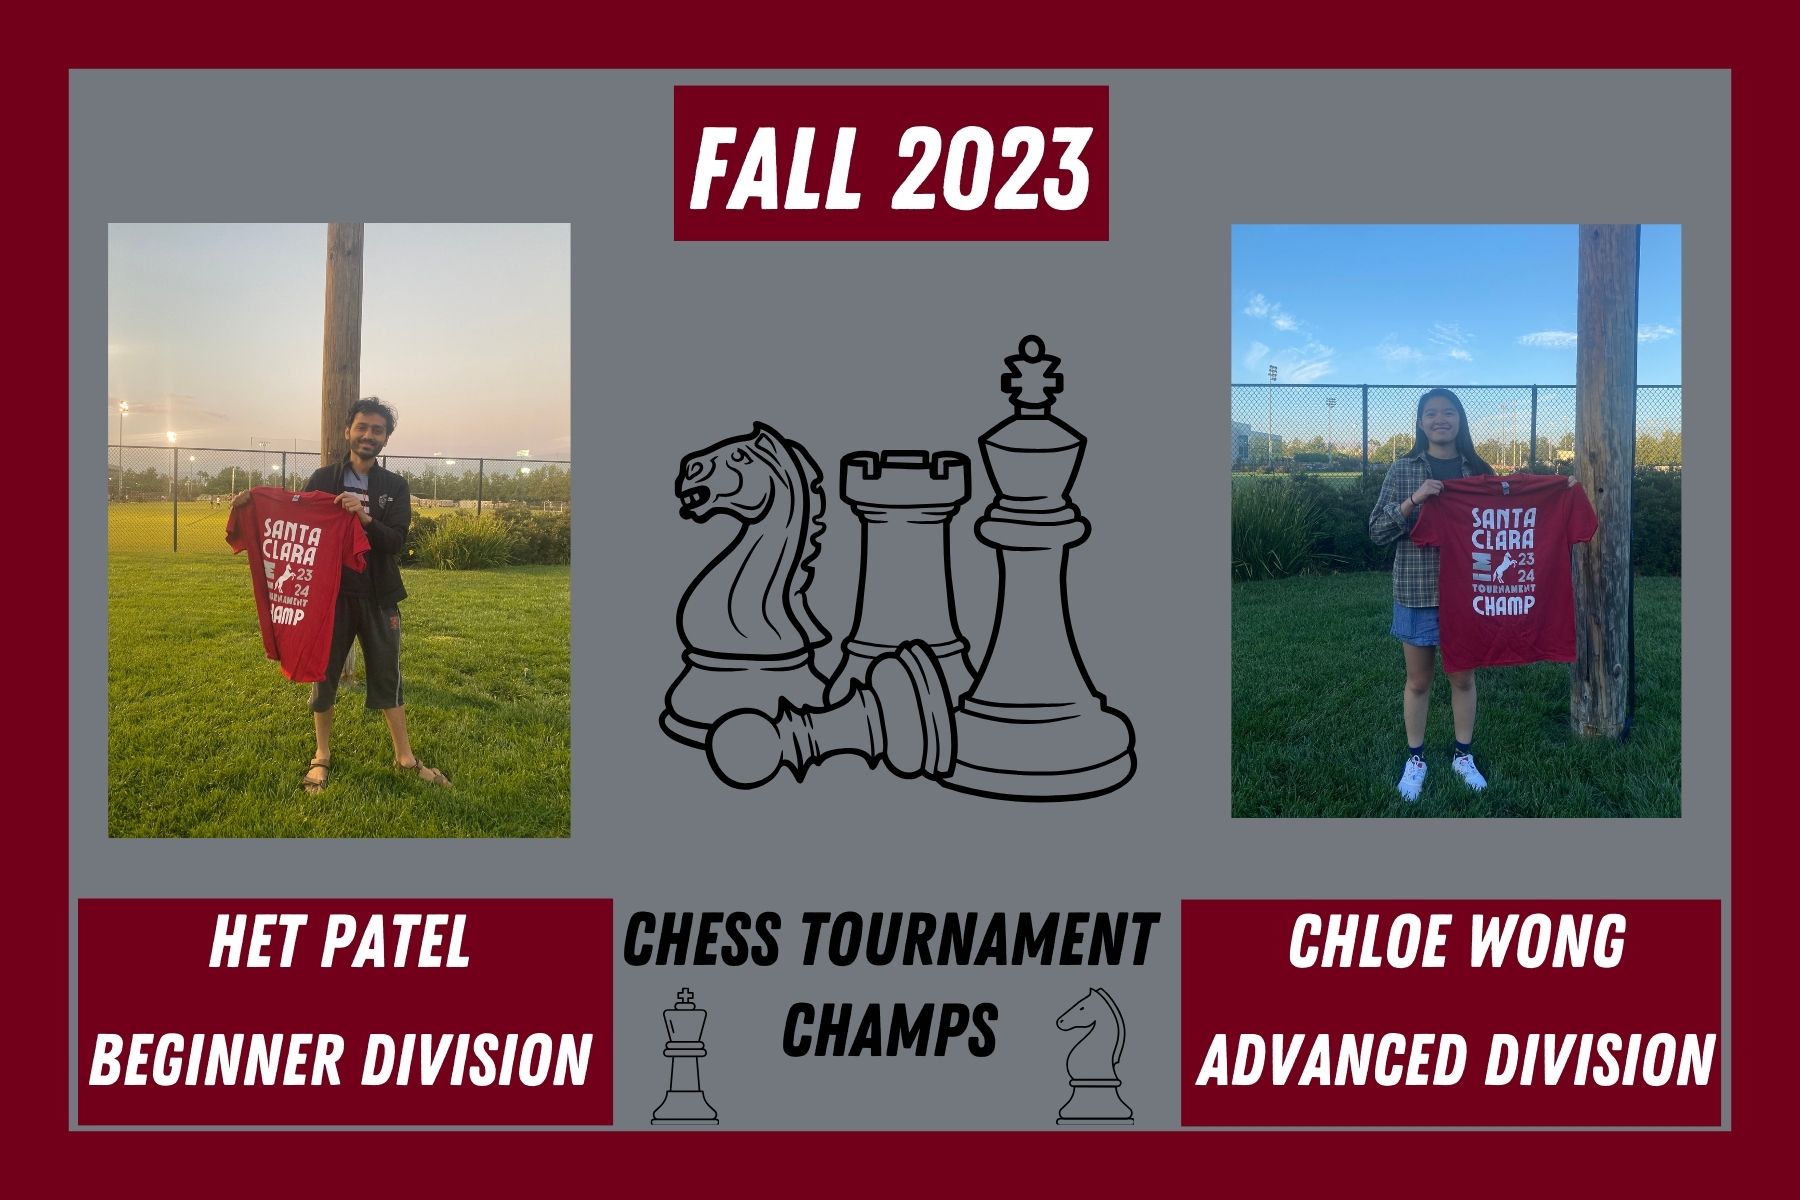 Photos of both IM Chess tournament winners, Het Patel and Chloe Wong posing with their IM Champion T Shirts